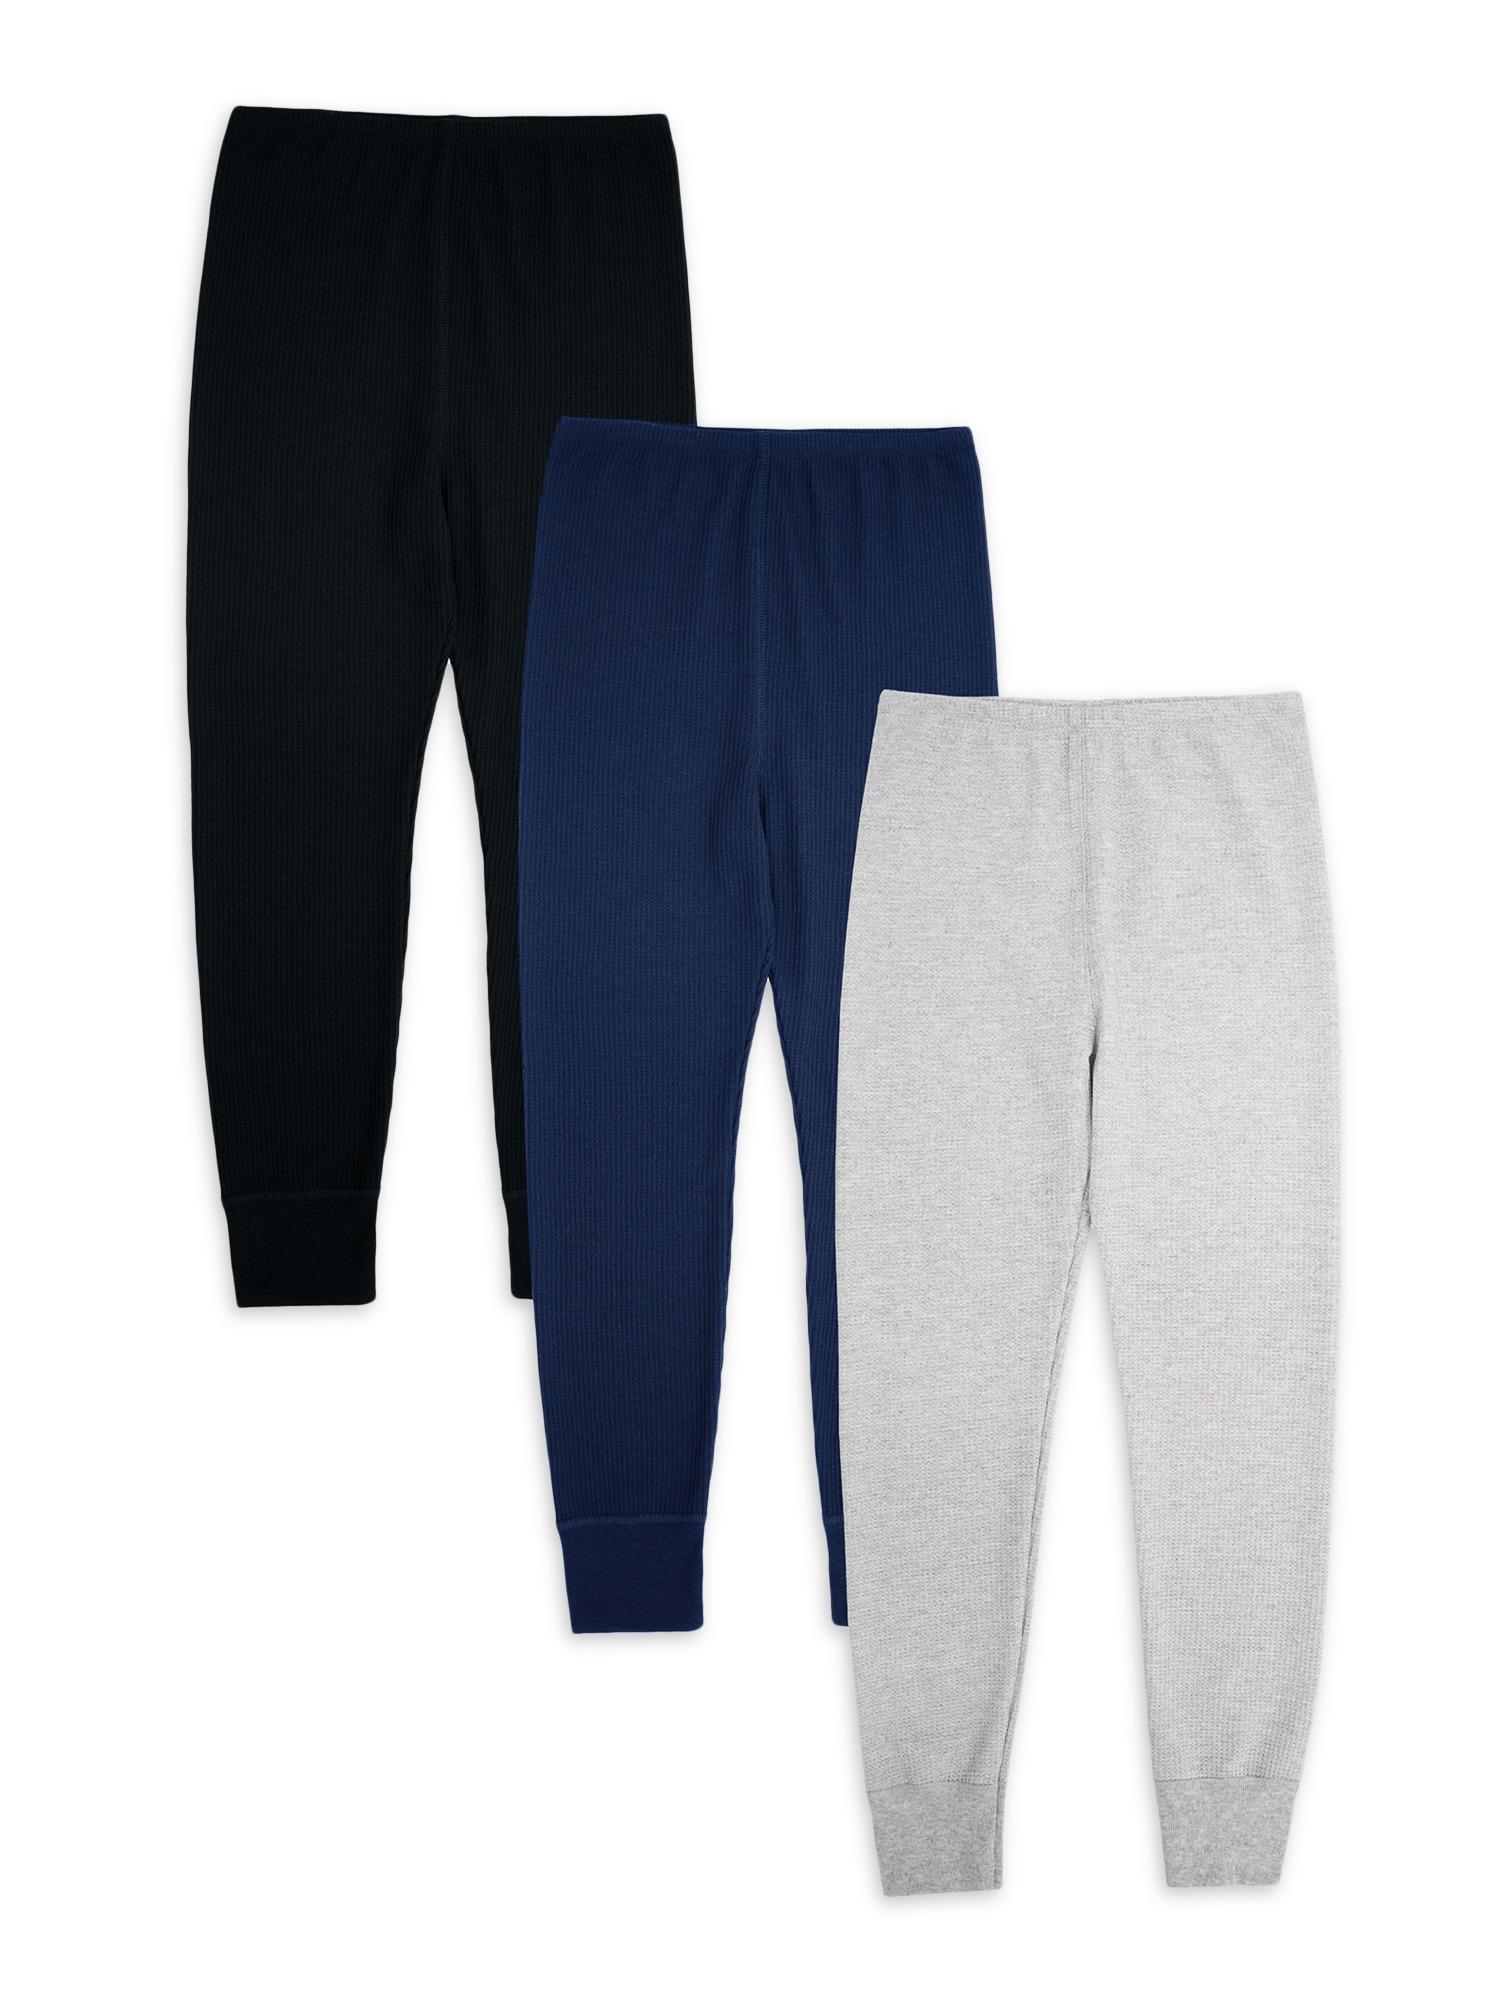 Fruit of the Loom Boy's & Girl's Waffle Thermal Bottoms, 3-Pack Set, Sizes 4-18 - image 1 of 11